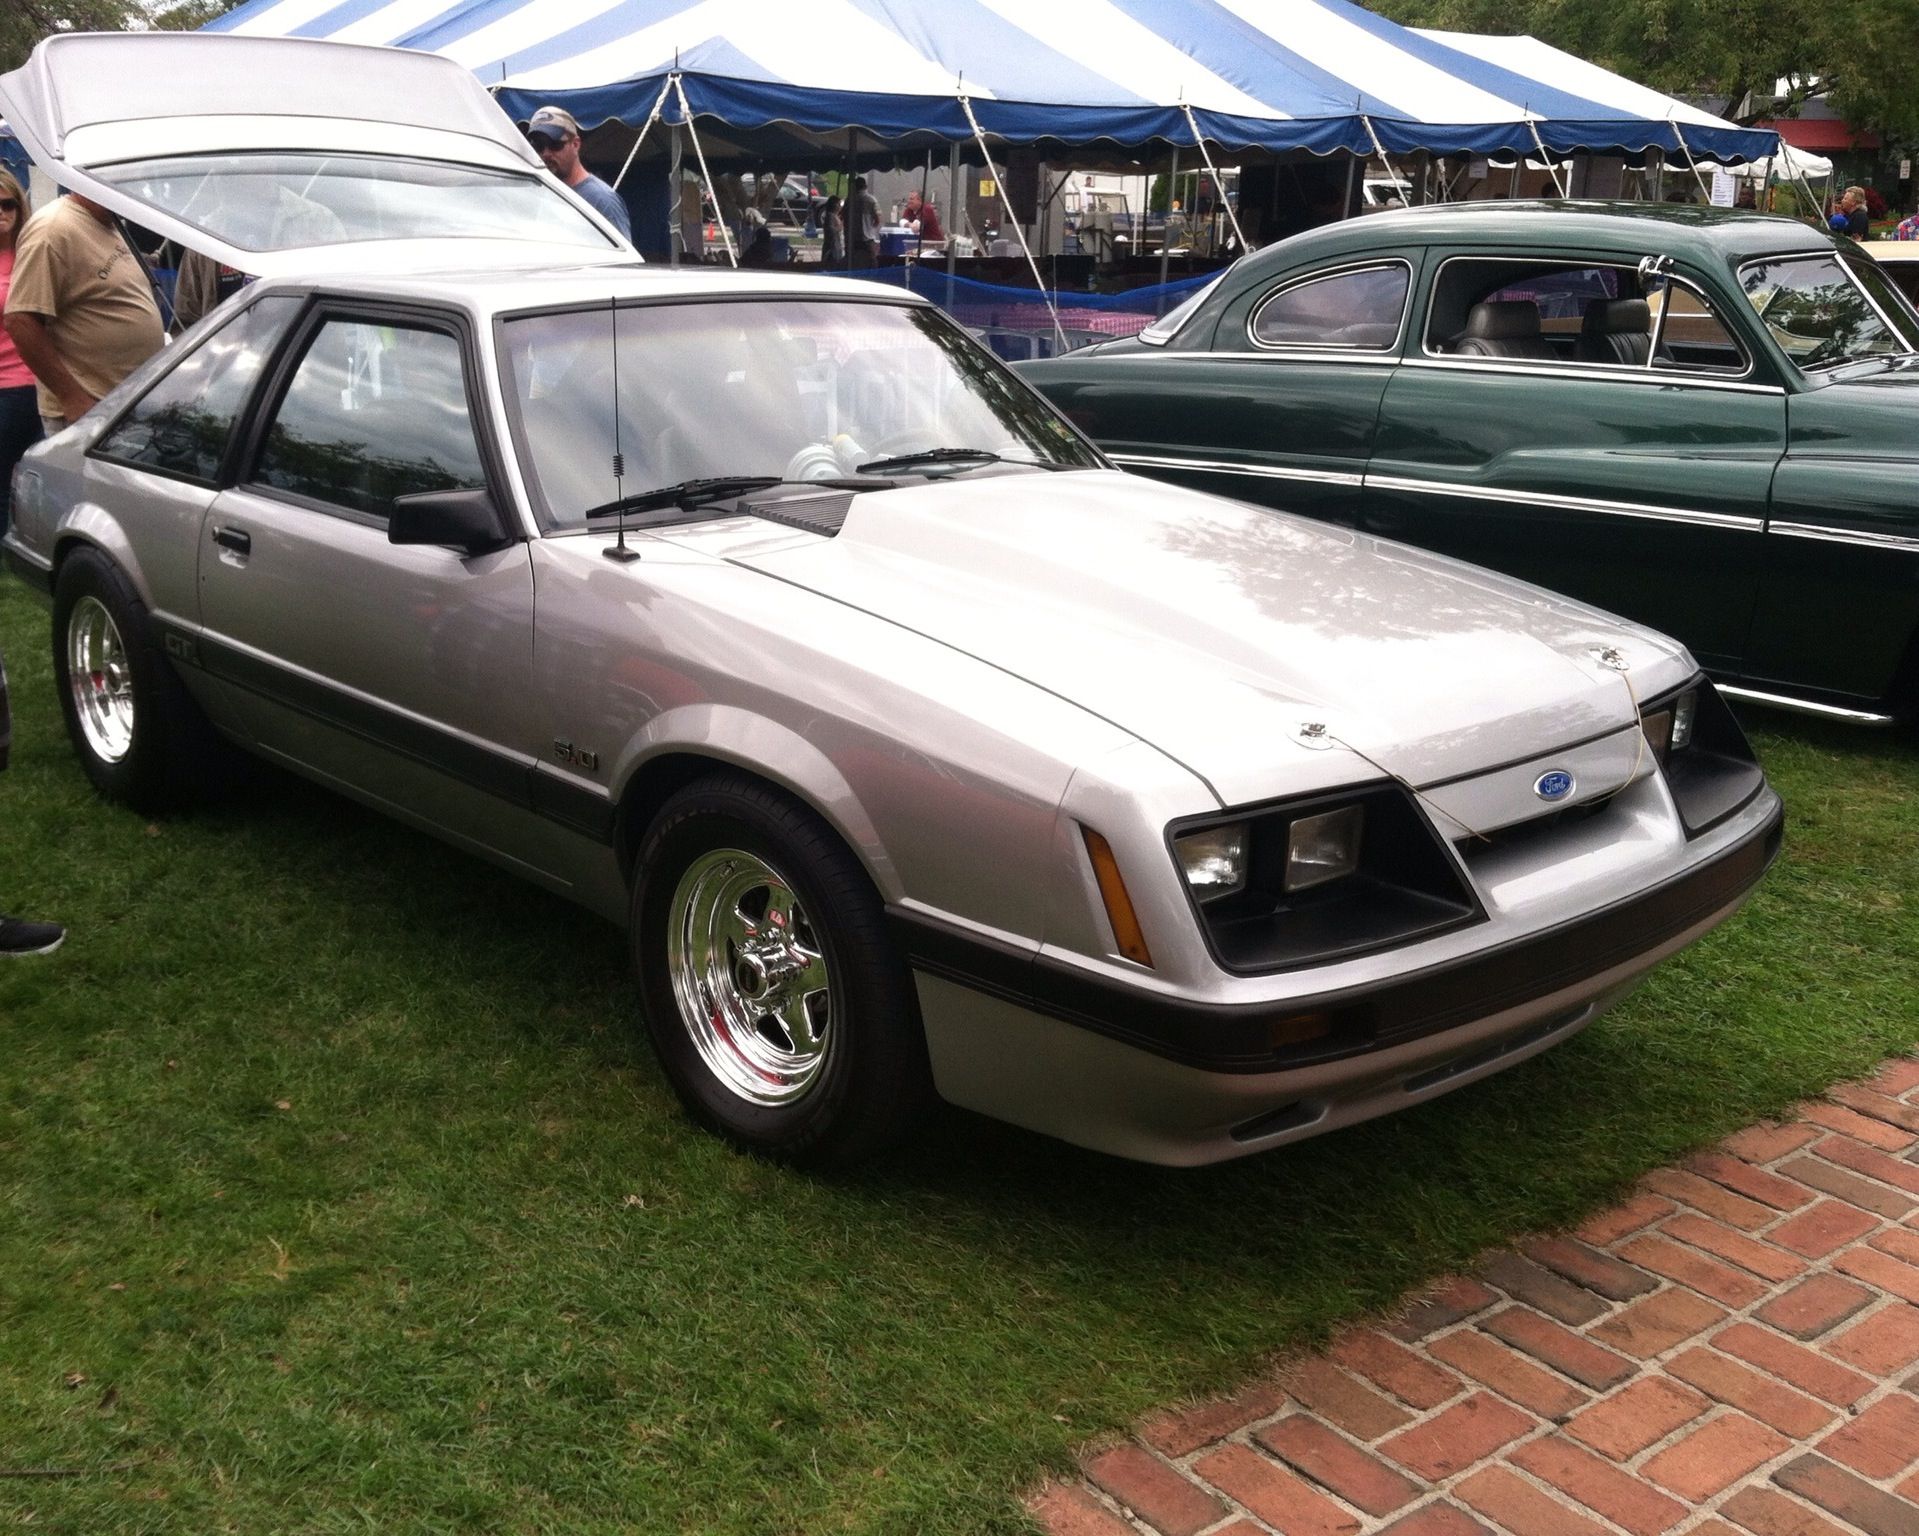 Silver 1986 Ford Mustang